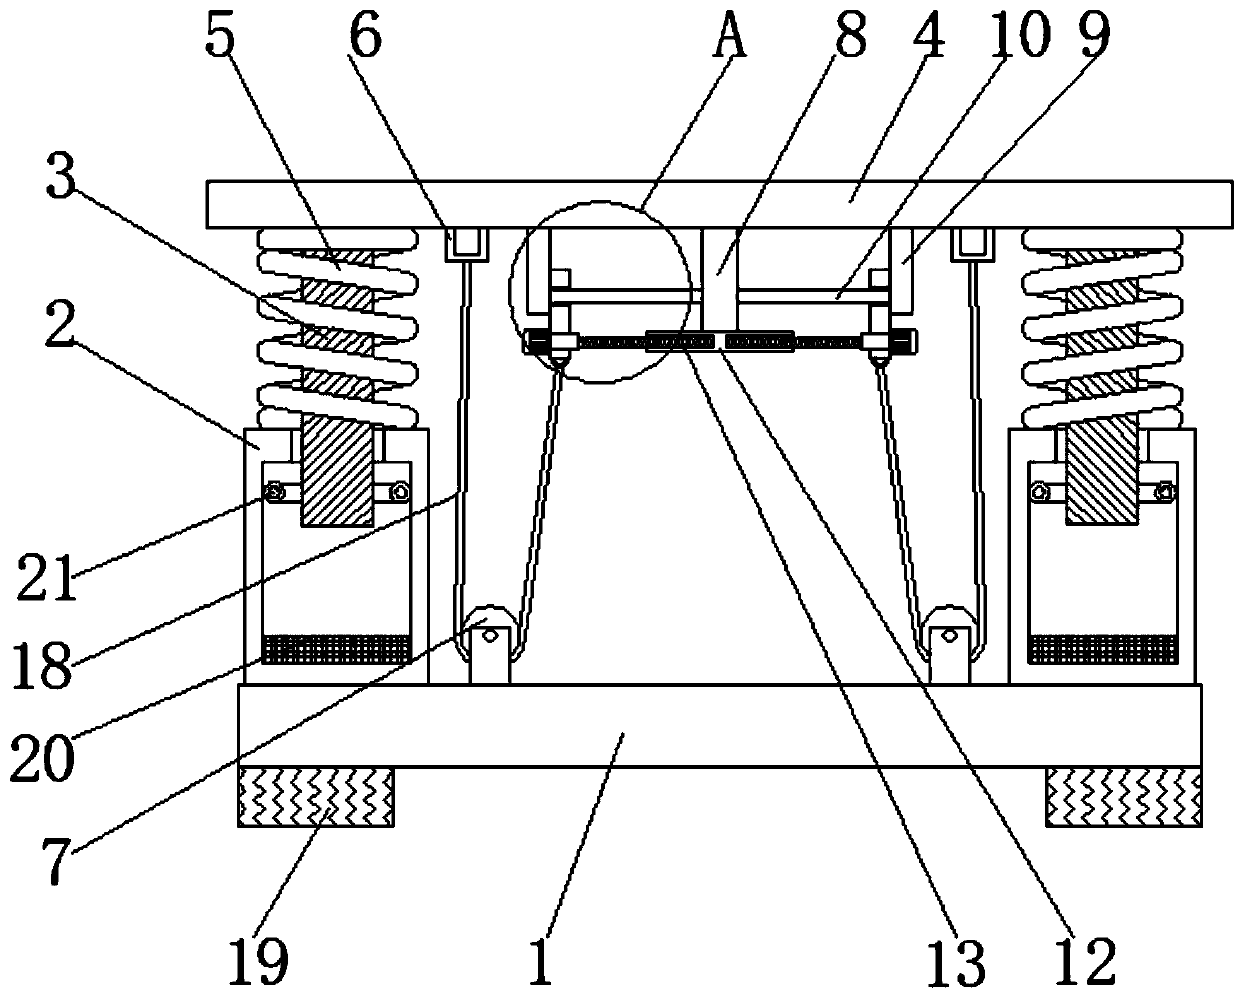 Supporting device for textile machinery